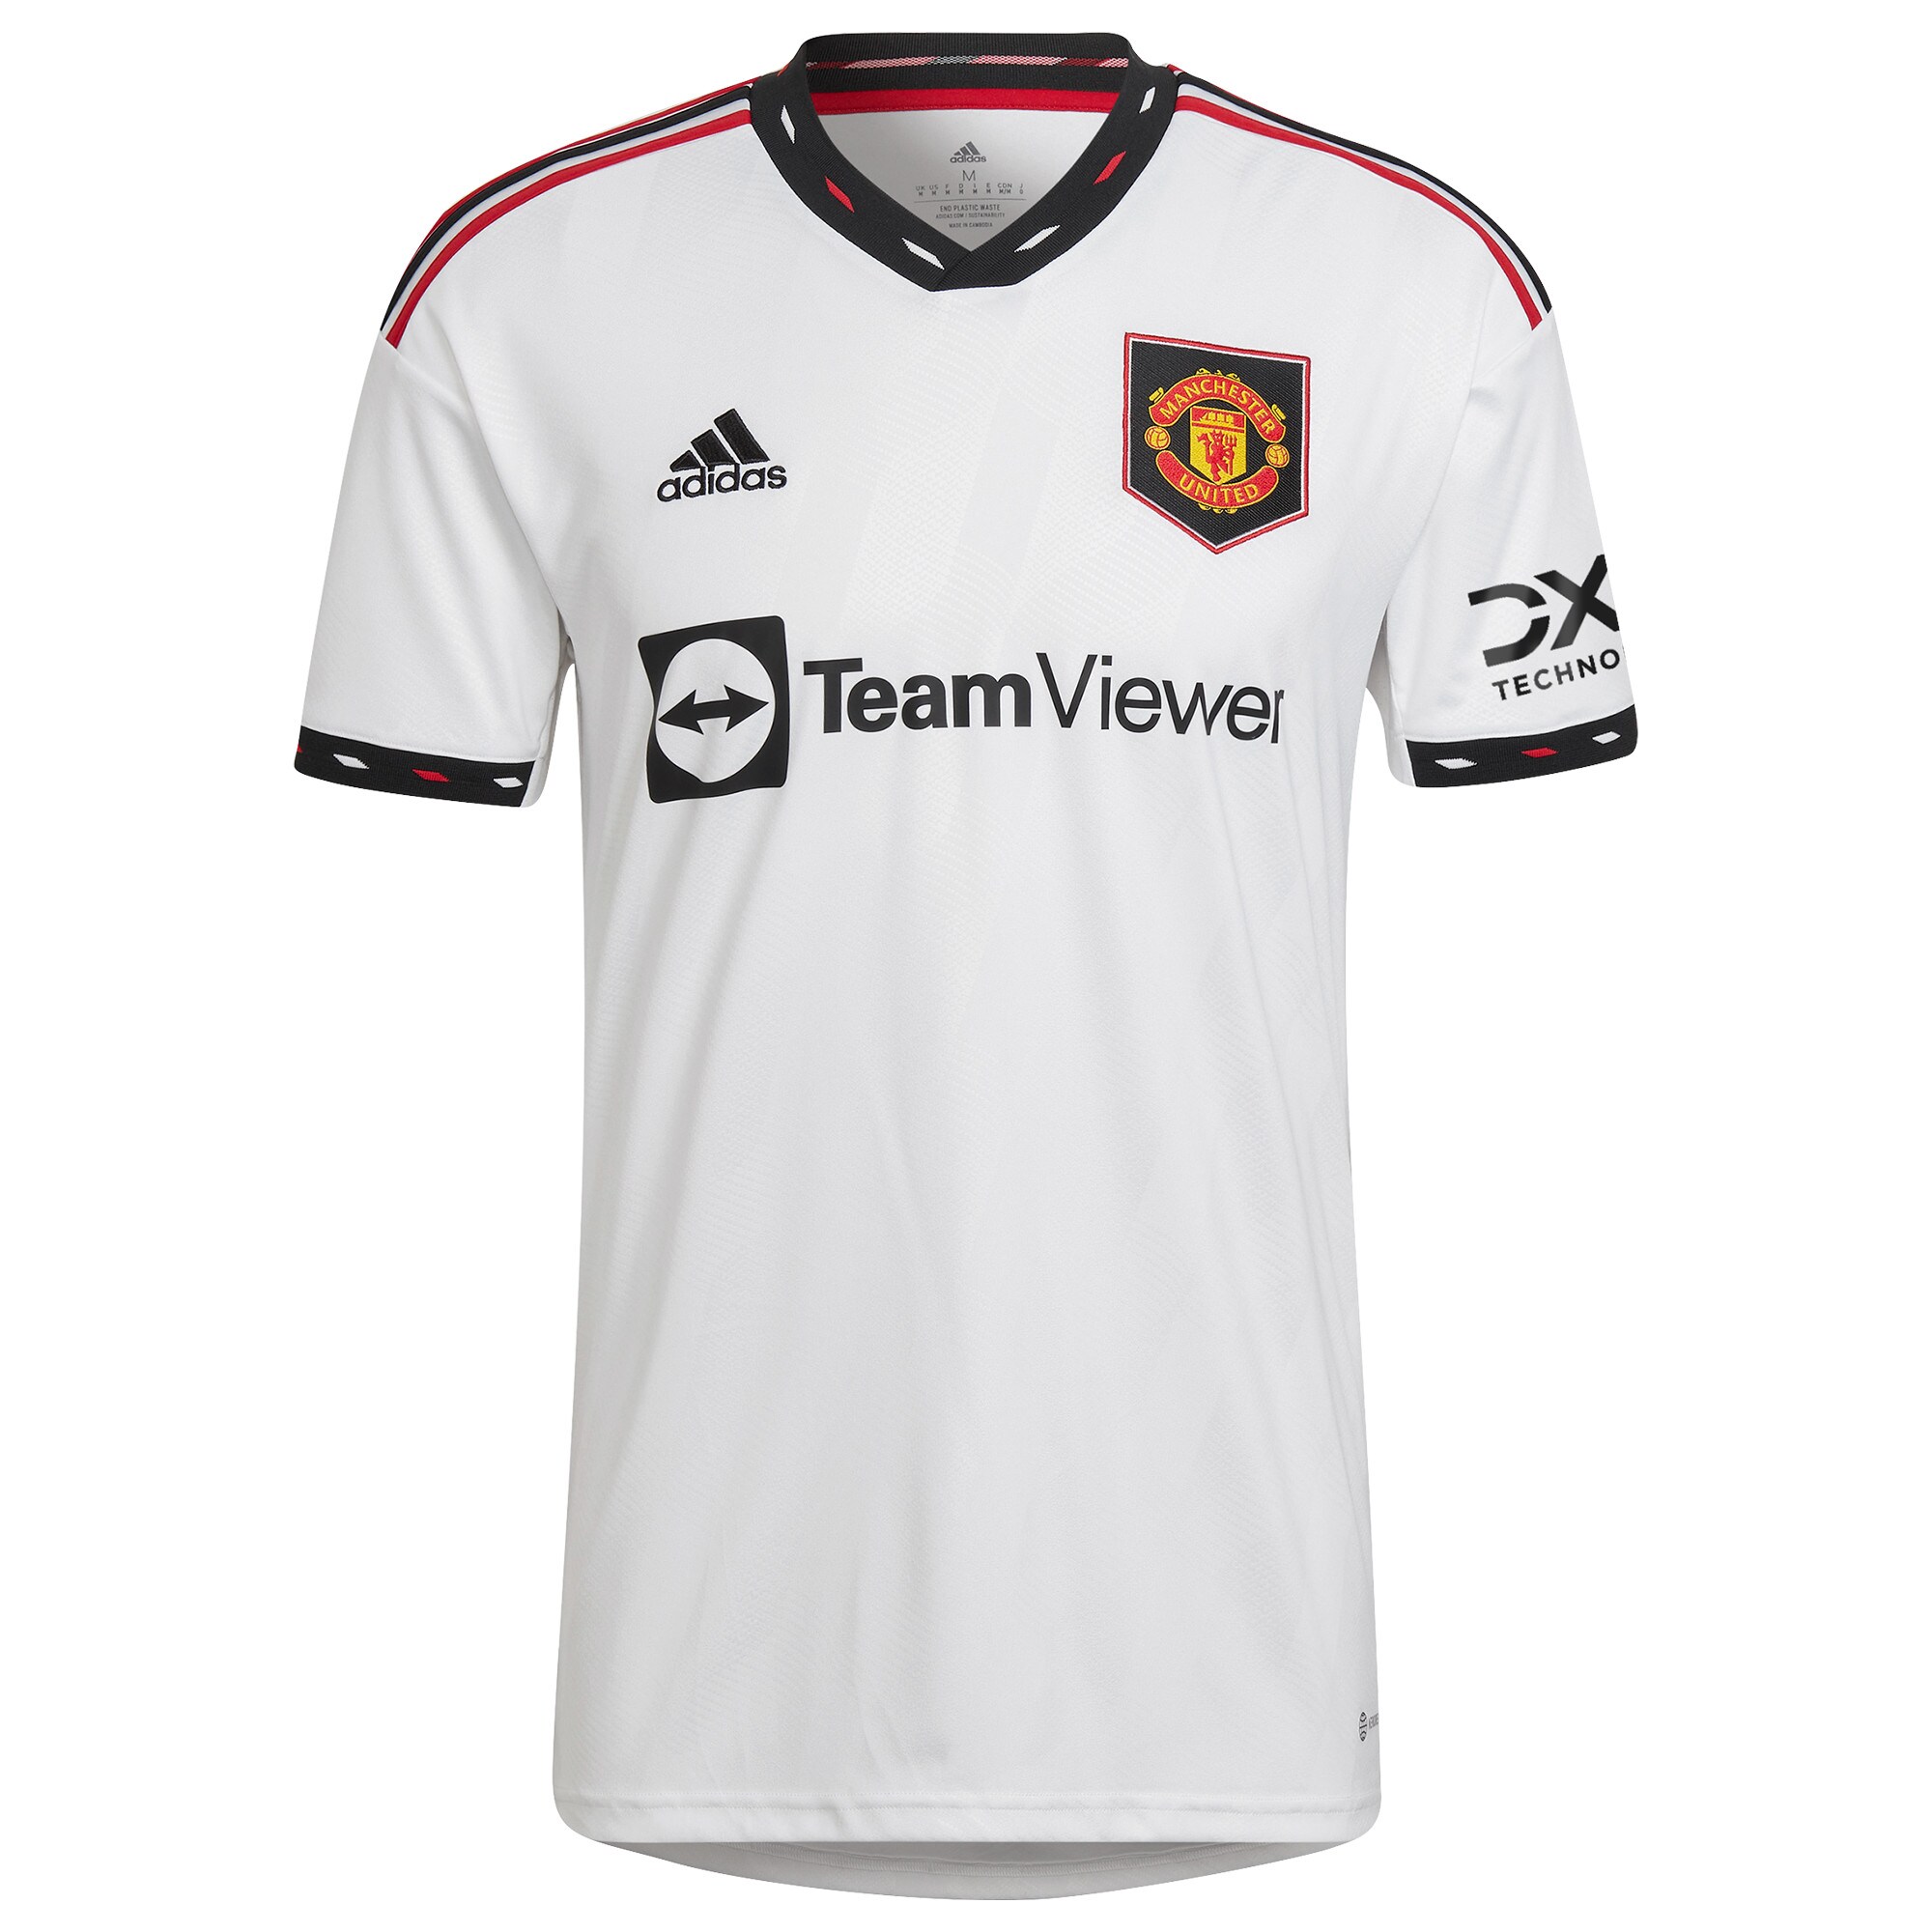 Men Manchester United Away Shirts Fred Shirt 2022-23 Fred 17 Printing